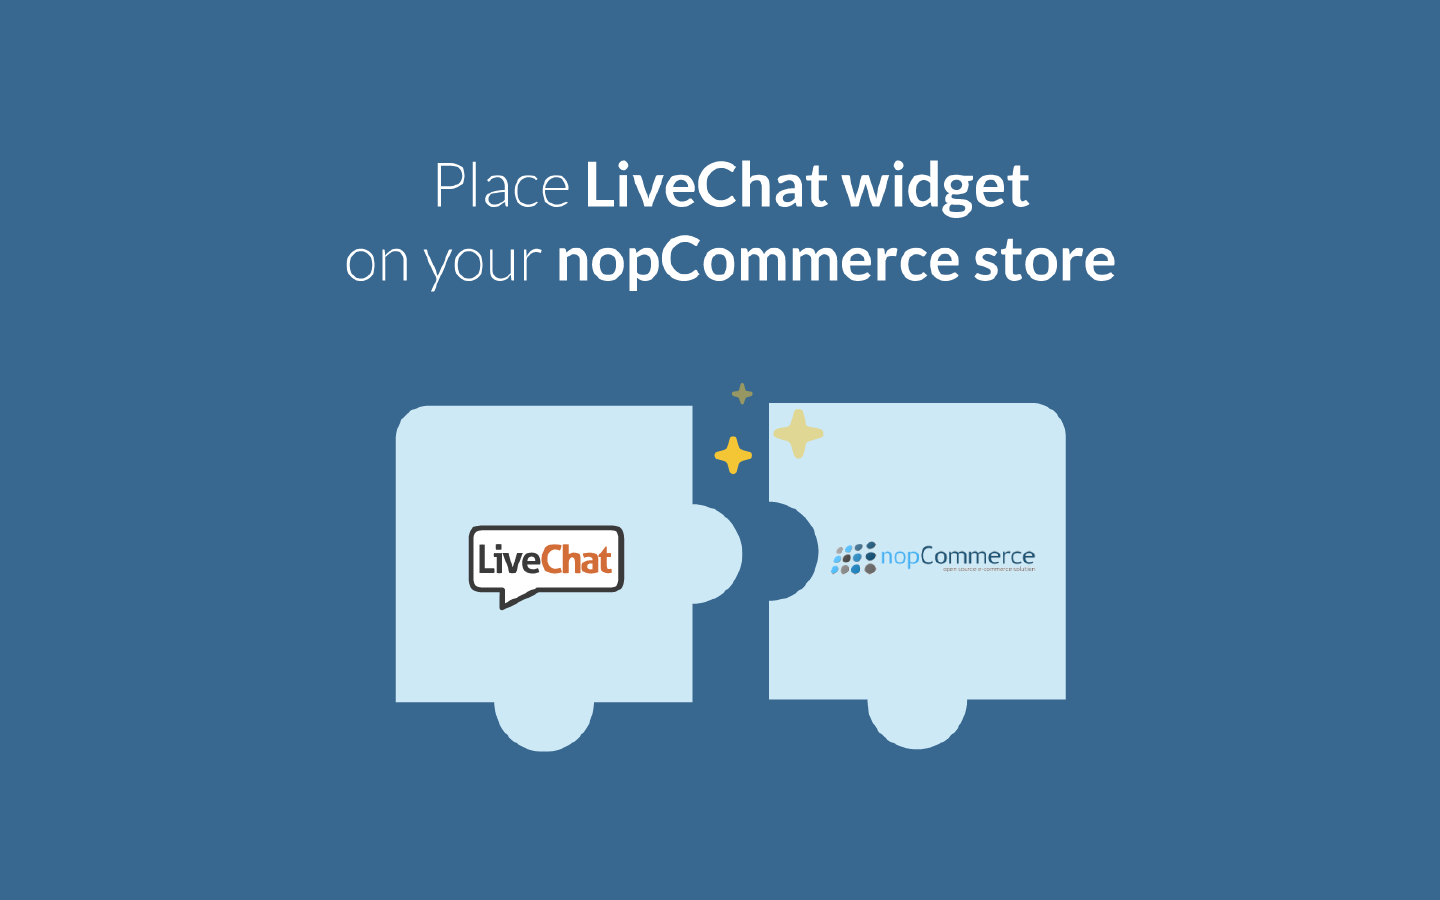 LiveChat integrates with nopCommerce